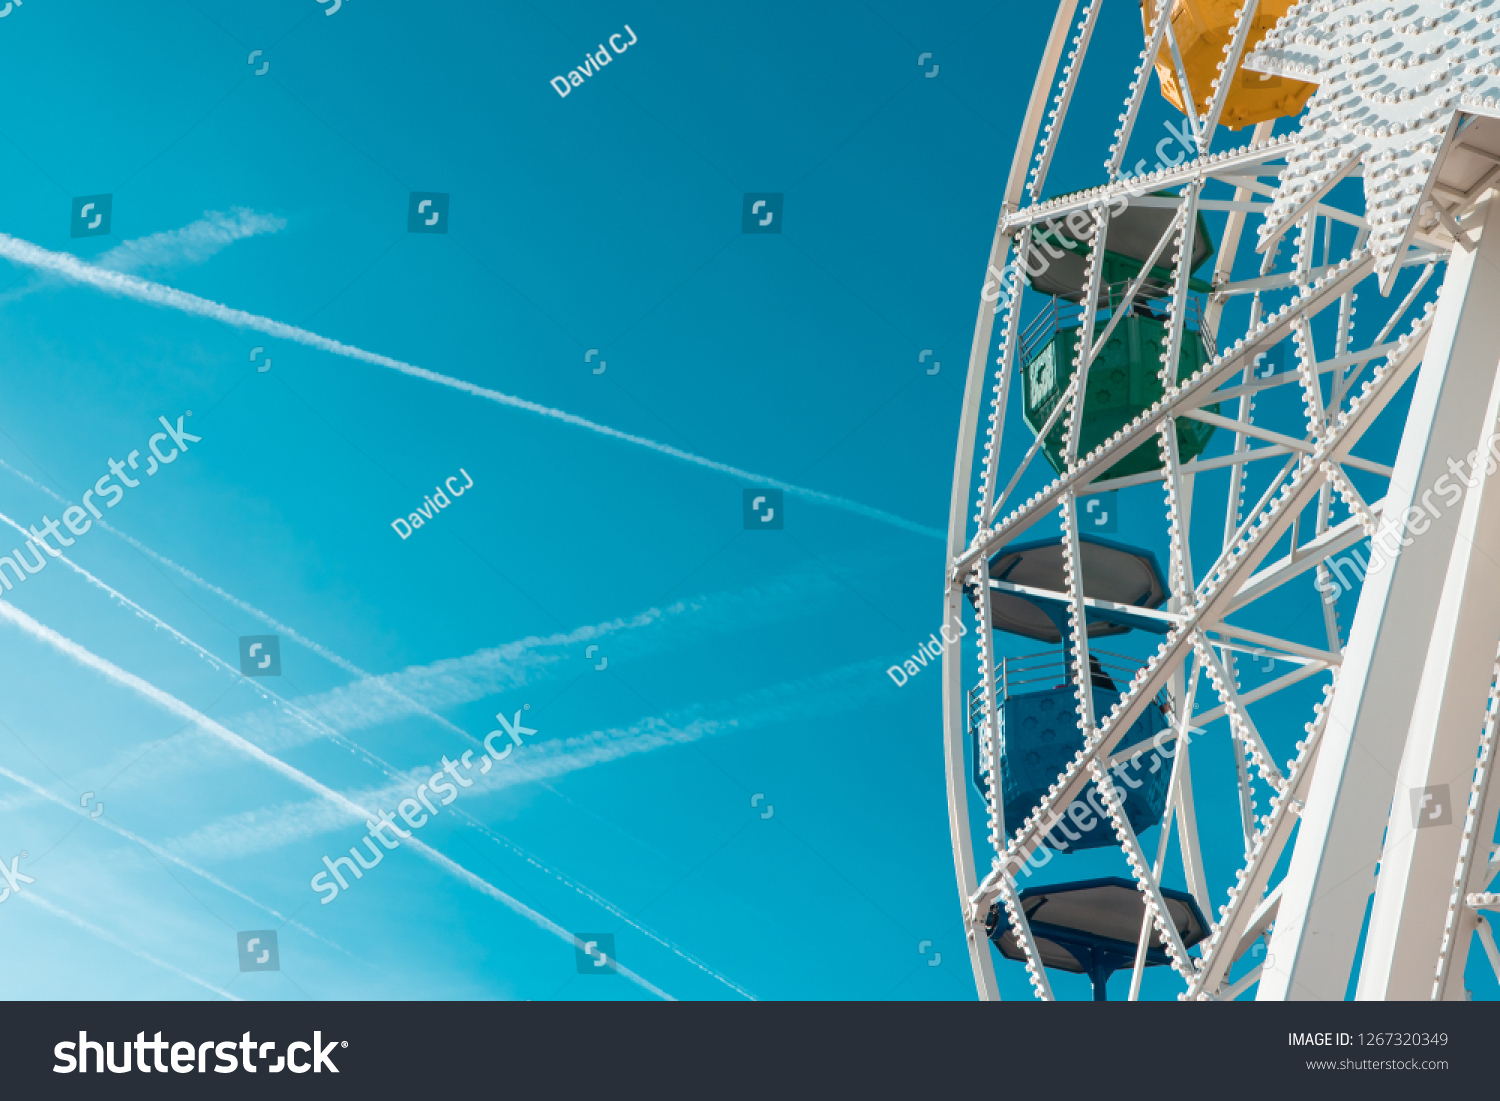 Colorful ferris wheel at fun amusement park with clear blue skies. #1267320349